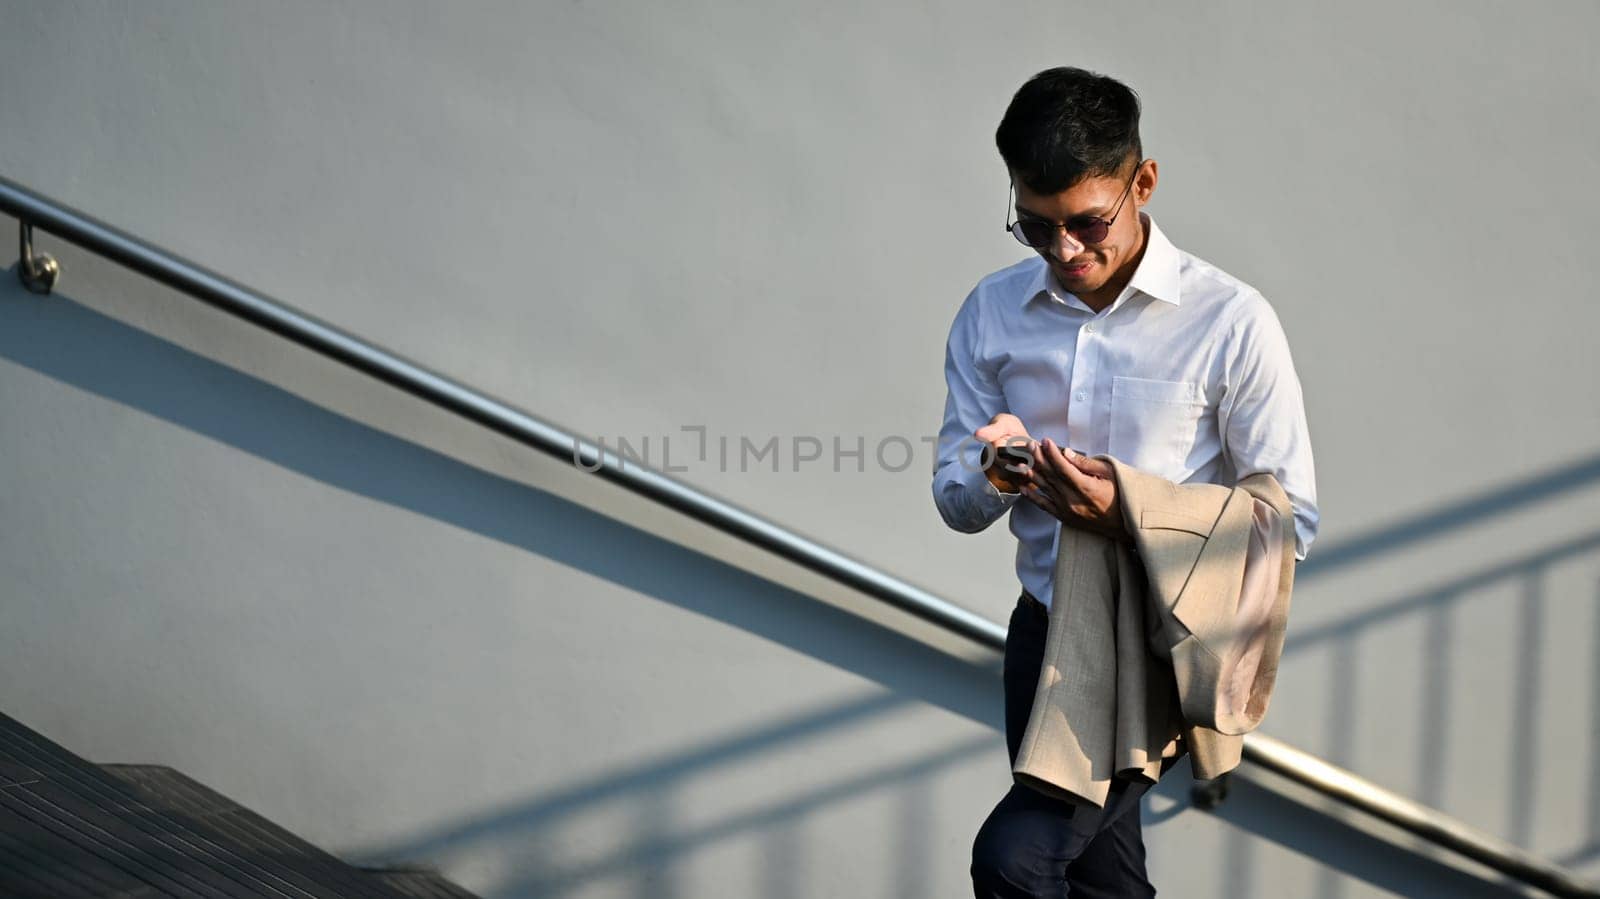 Millennial businessman using smartphone while sitting outside office building. Modern lifestyle and technology concept.